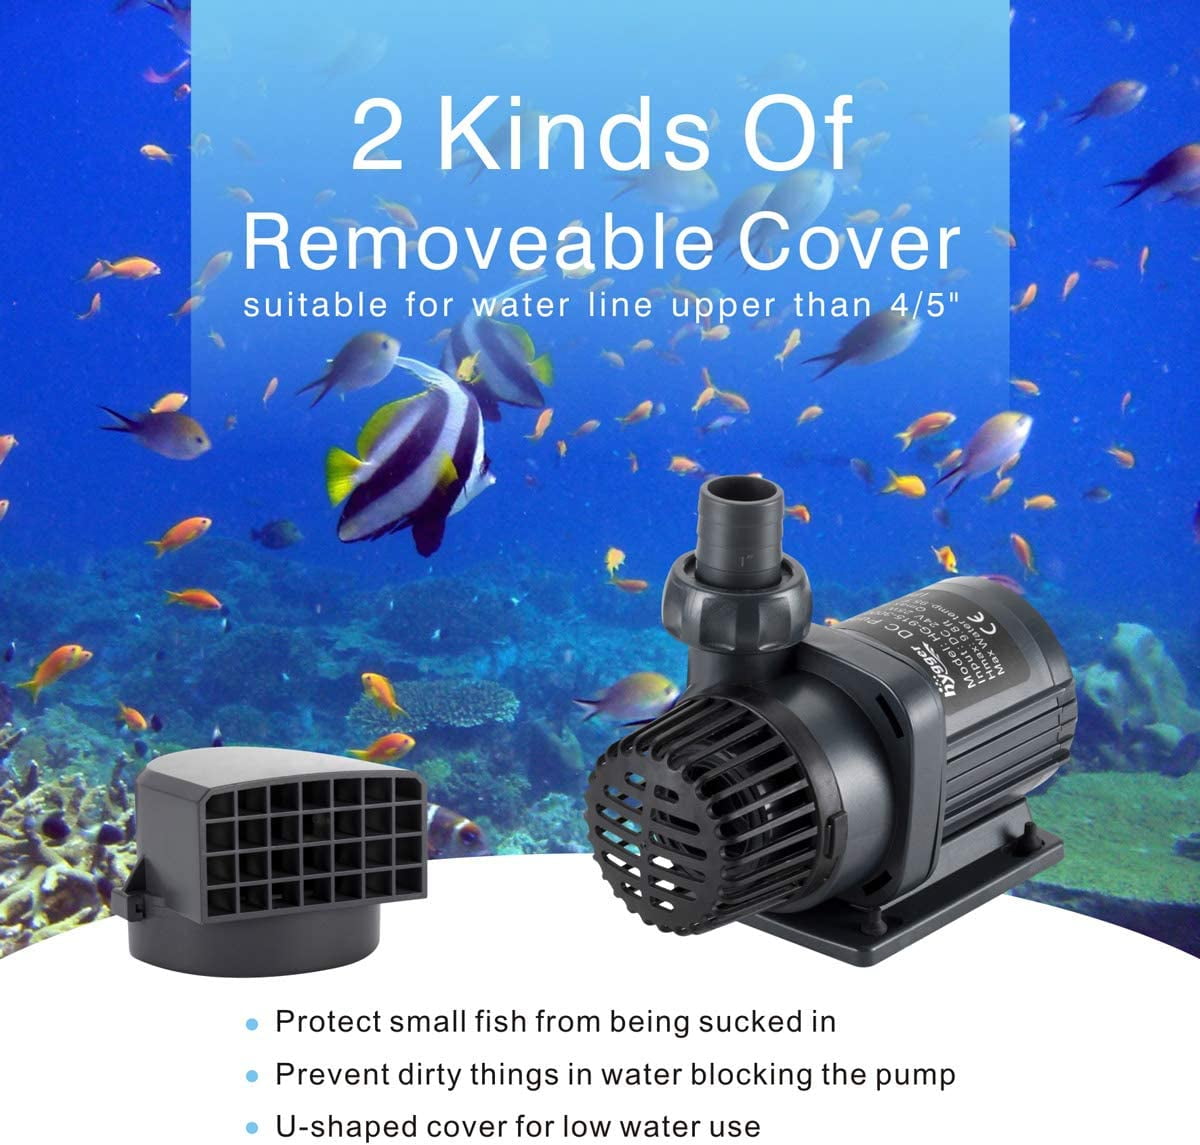 Submersible and Inline Return Pump for Fish Tank,Aquariums,Fountains,Sump,Hydroponic,Pond,Freshwater and Marine Water Use JEREPET Aquarium 24V DC Water Pump with Controller 